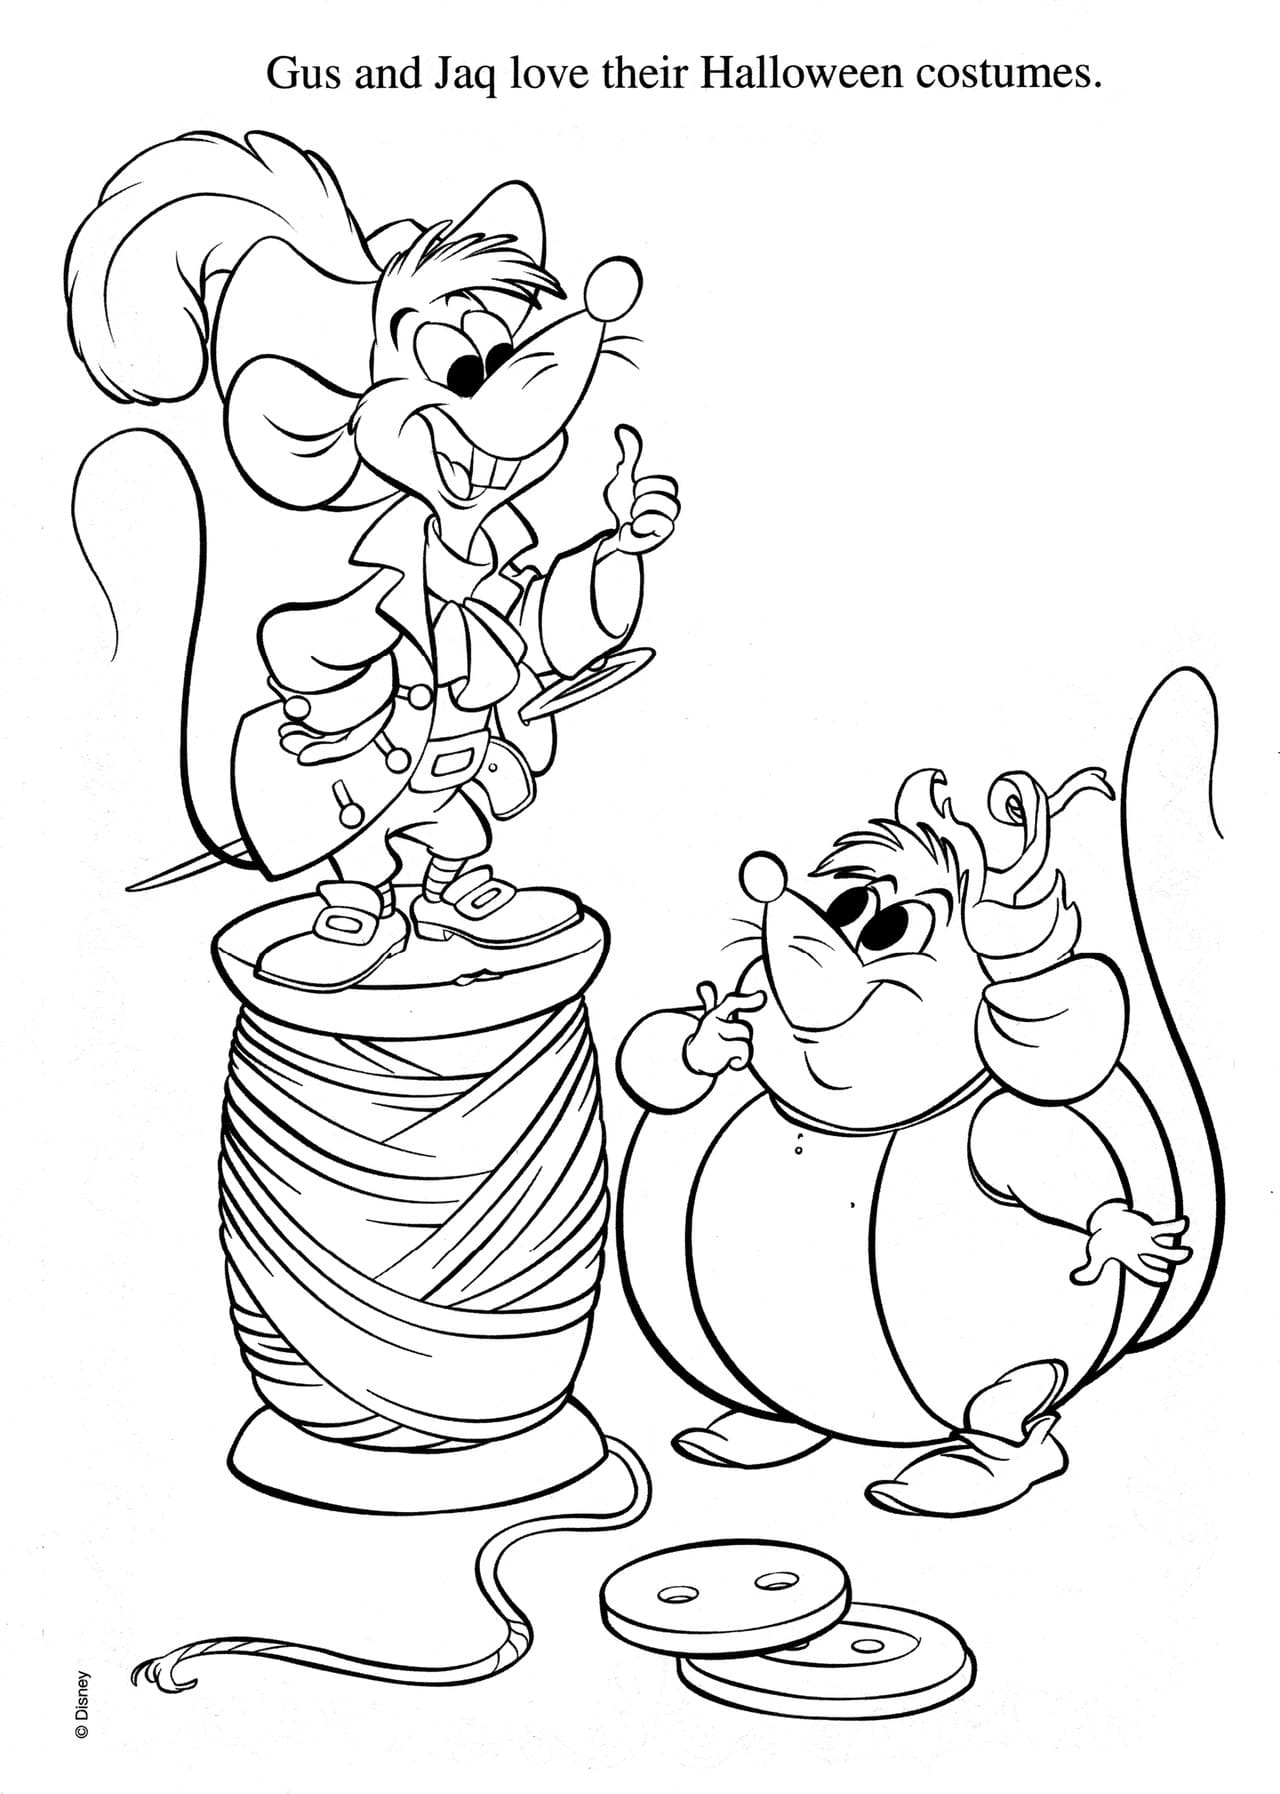 Gus Cinderella Image For Kids Coloring Page